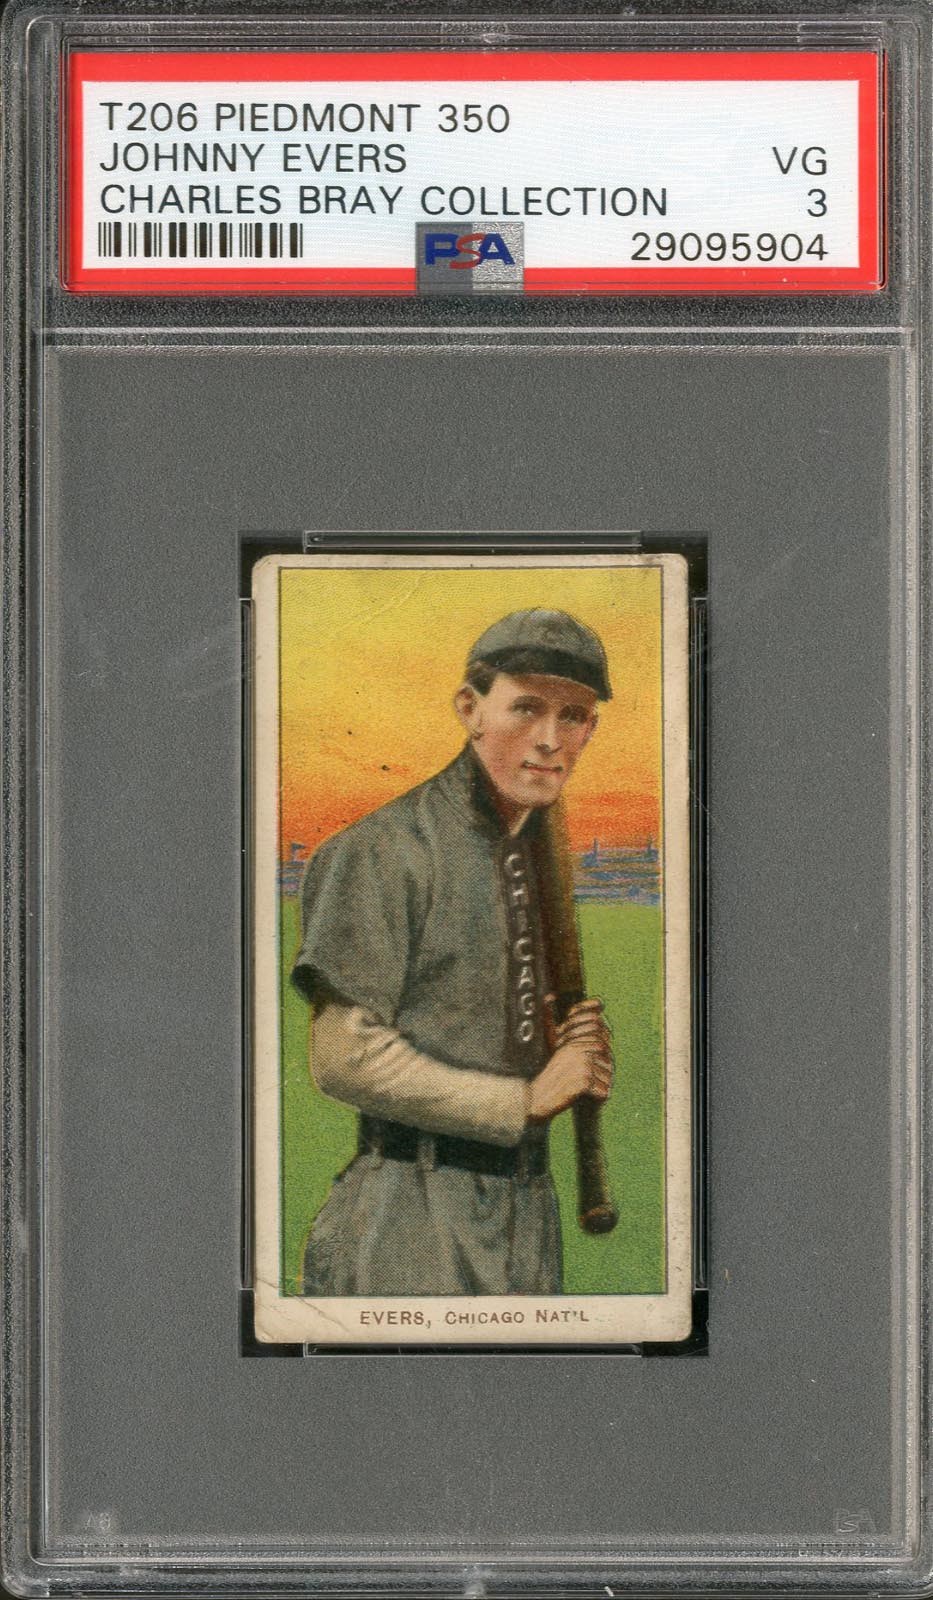 T206 Piedmont 350 Johnny Evers PSA 3 From The Charles Bray Collection